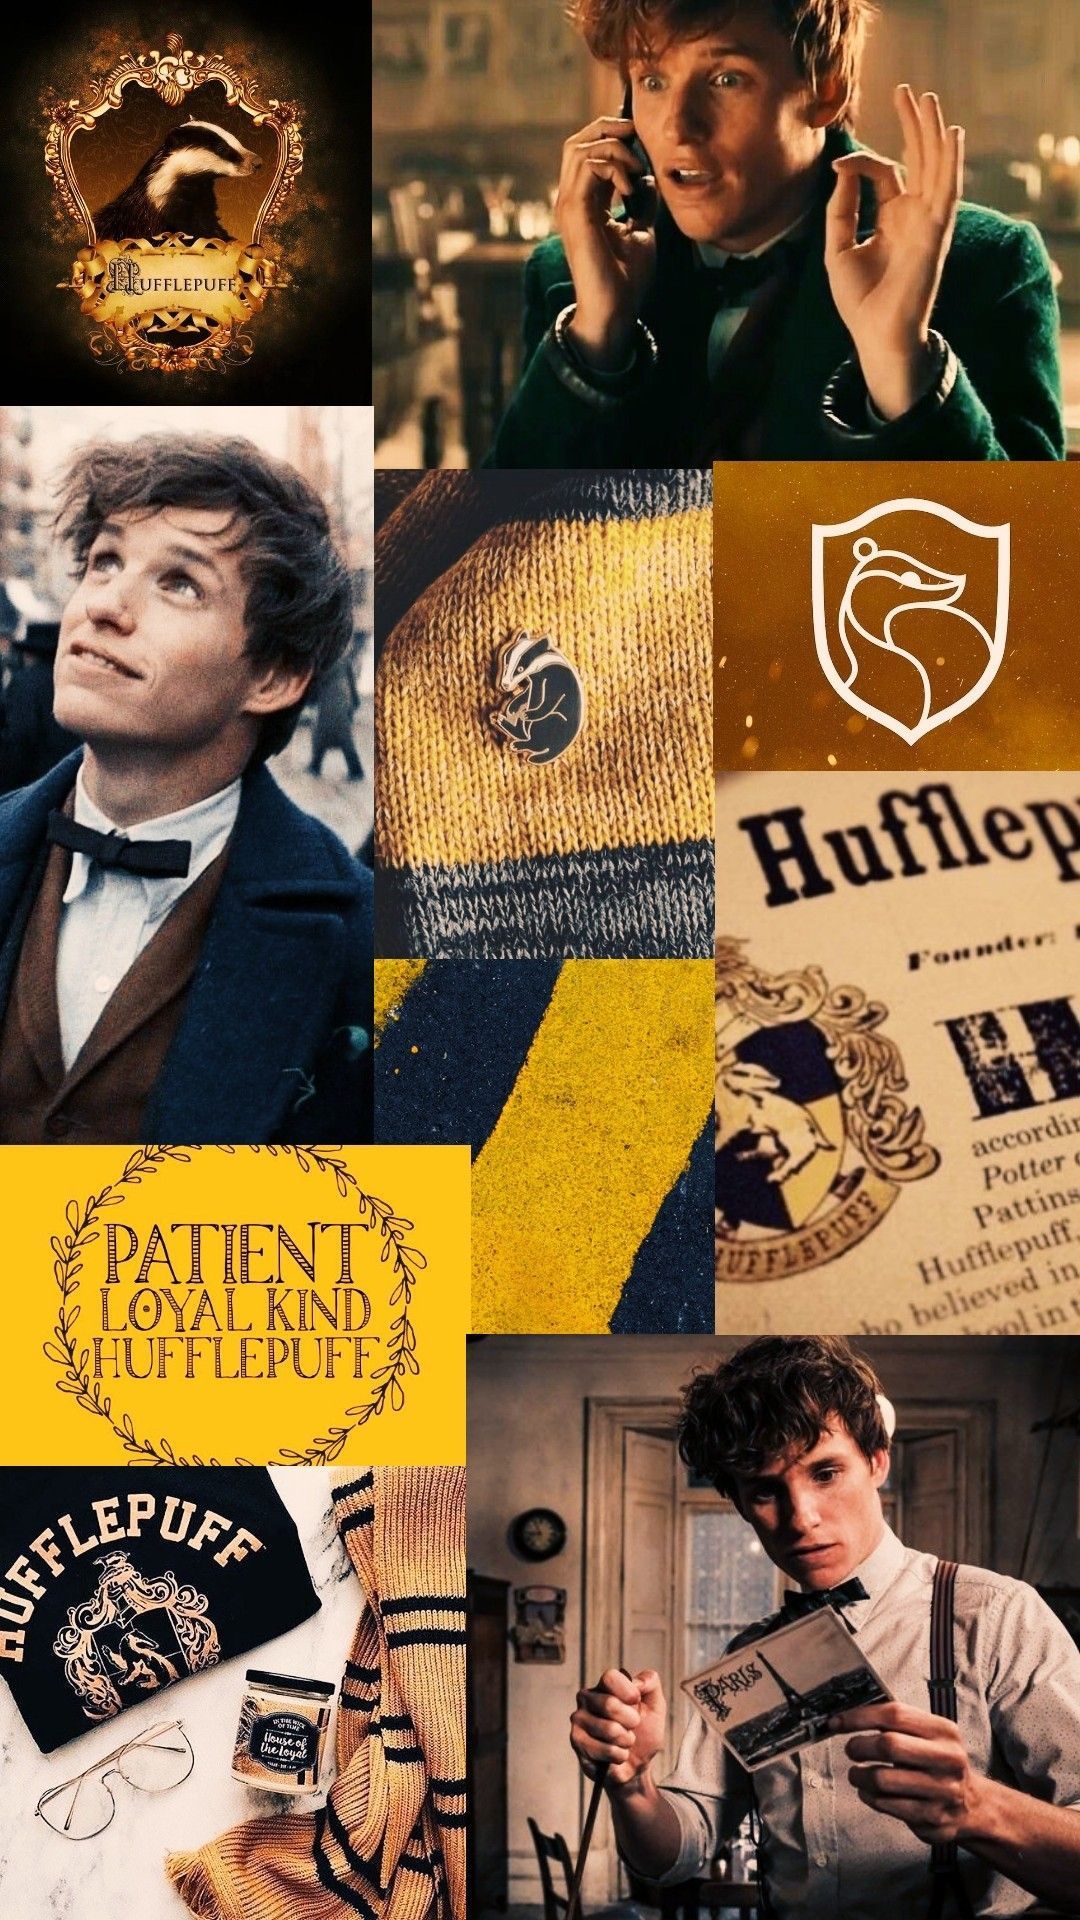 A collage of images of the Fantastic Beasts series and the Harry Potter series with the Hufflepuff house symbol - Hufflepuff